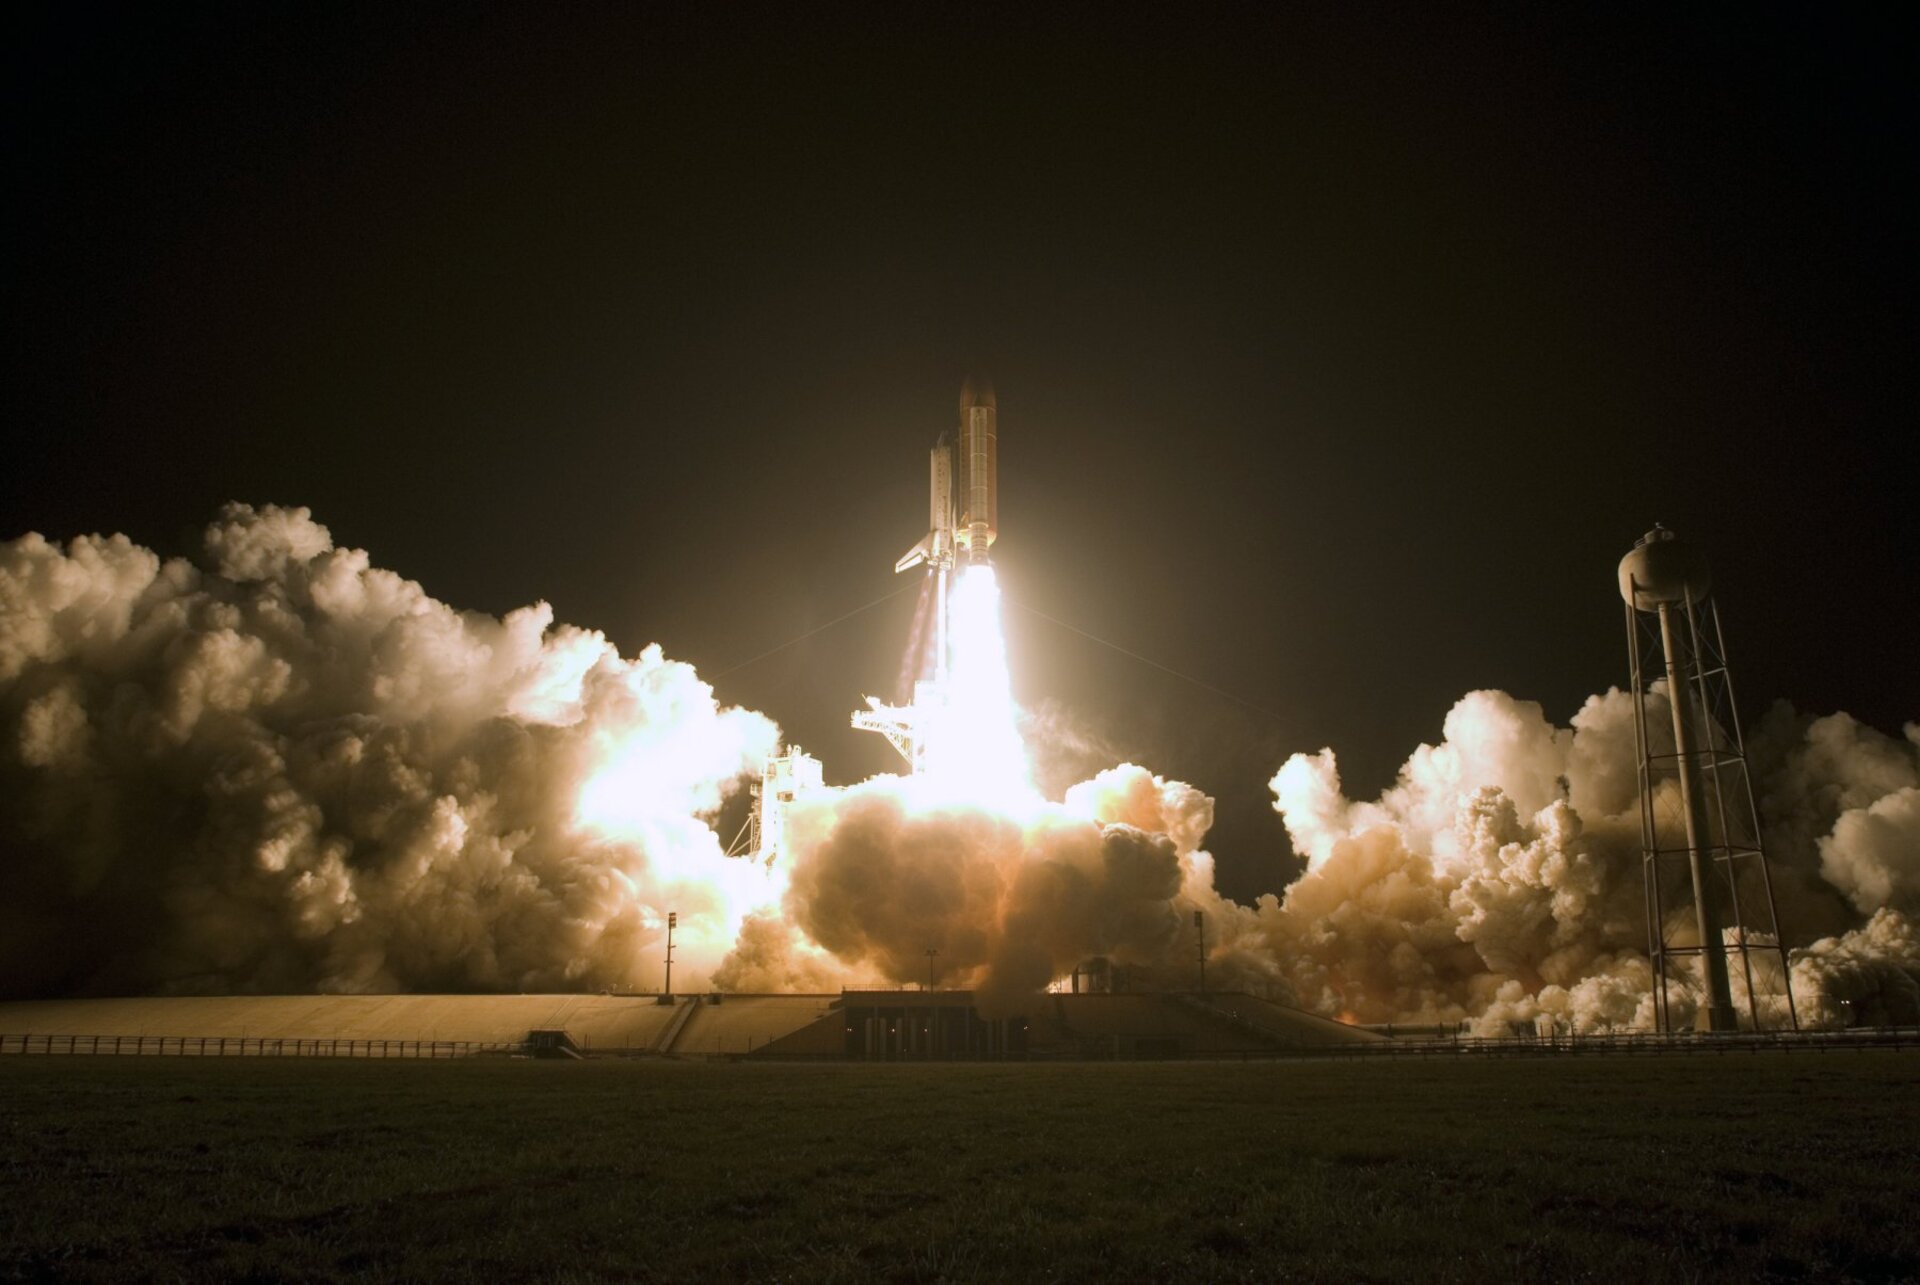 Launch of Space Shuttle Endeavour at 01:55 CET on 15 November 2008